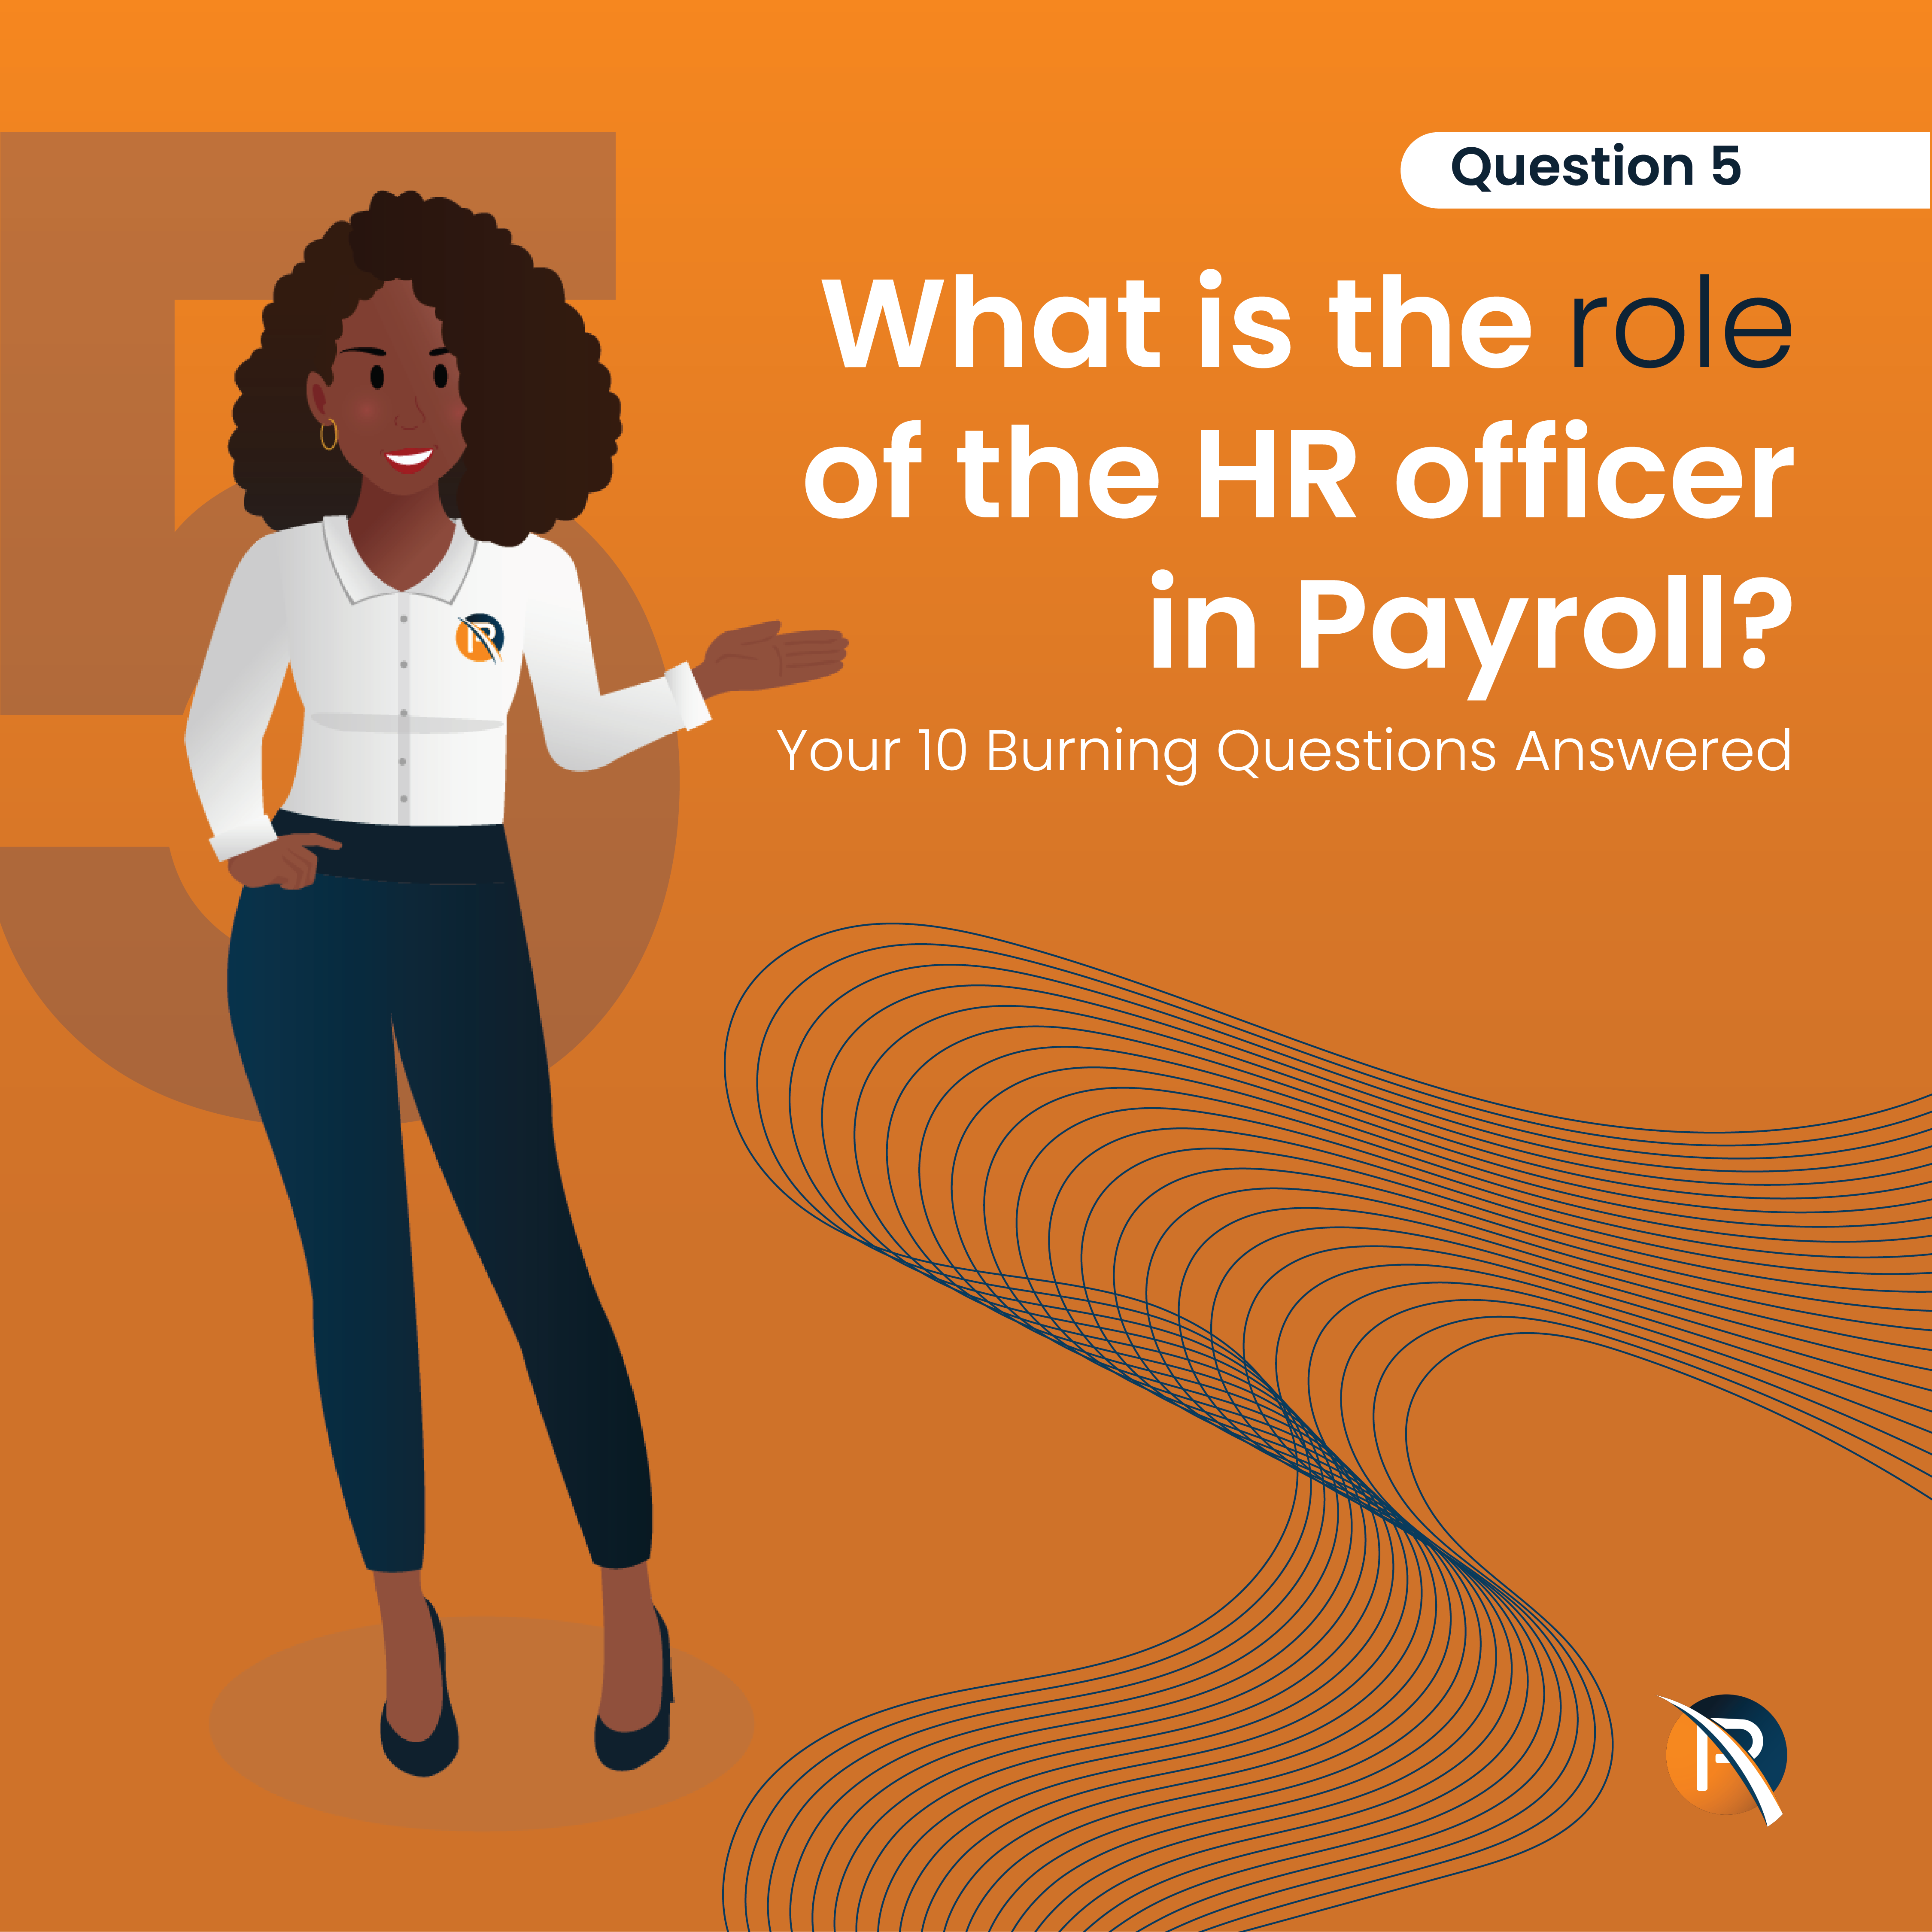 The role of an HR officer in payroll